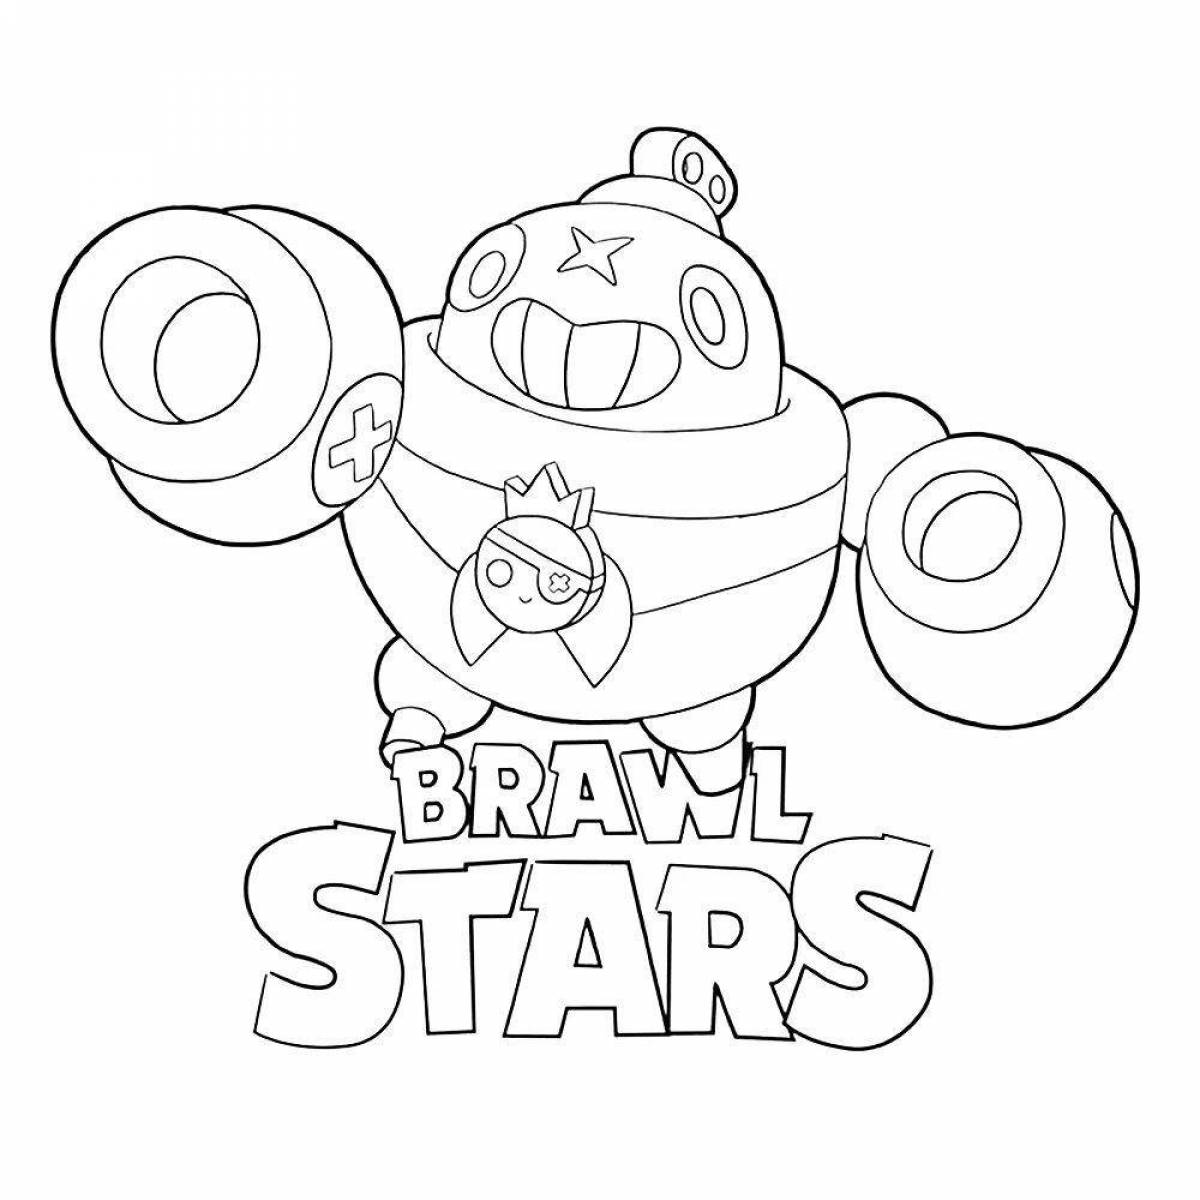 Impressive coloring pins from brawl stars